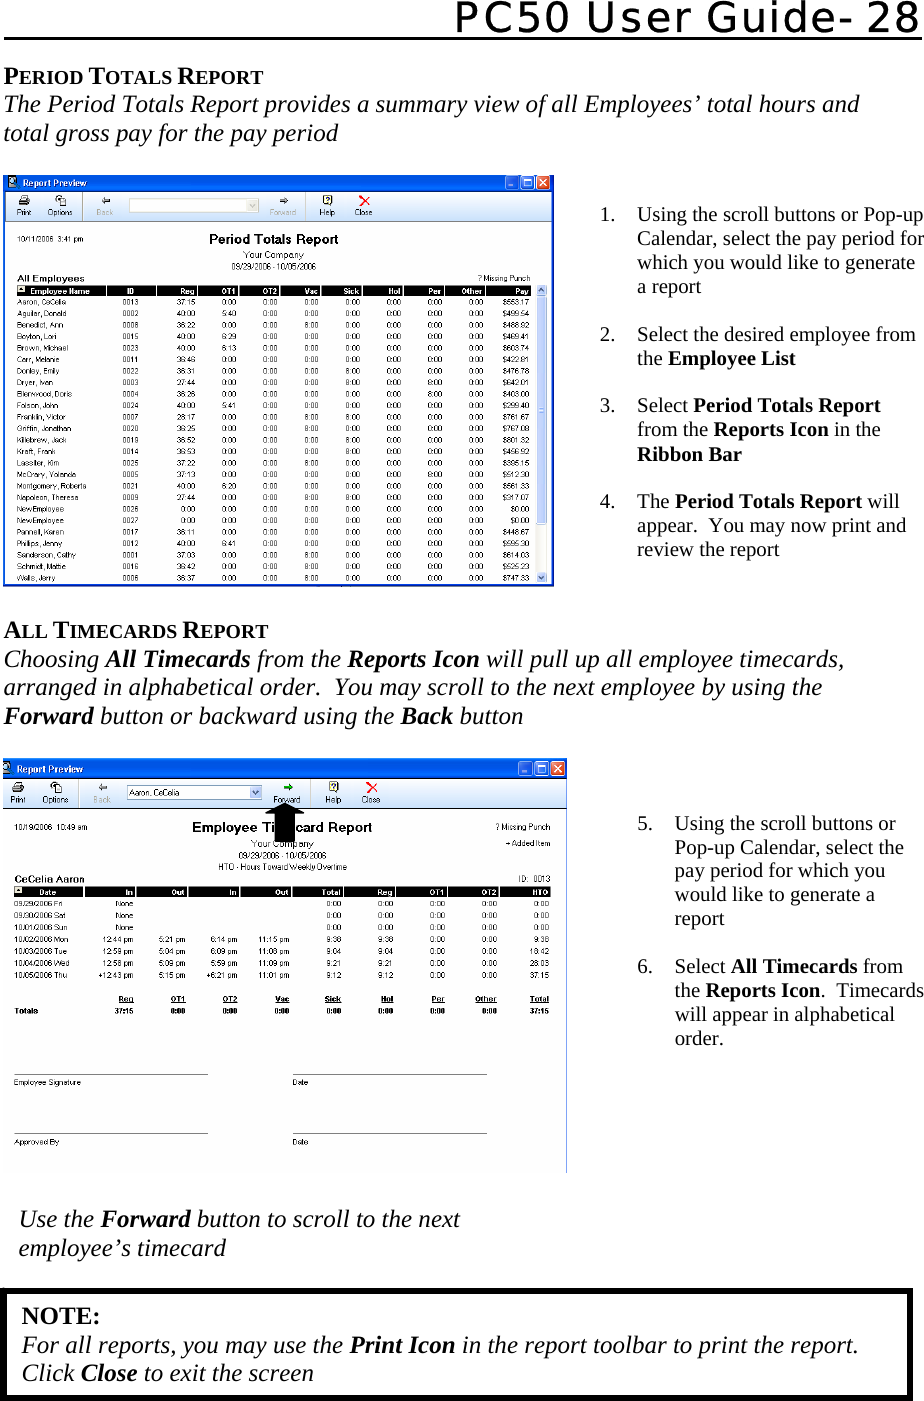   PC50 User Guide- 28   1. Using the scroll buttons or Pop-up Calendar, select the pay period for which you would like to generate a report  2. Select the desired employee from the Employee List  3. Select Period Totals Report from the Reports Icon in the Ribbon Bar  4. The Period Totals Report will appear.  You may now print and review the report  5. Using the scroll buttons or Pop-up Calendar, select the pay period for which you would like to generate a report  6. Select All Timecards from the Reports Icon.  Timecards will appear in alphabetical order.  PERIOD TOTALS REPORT The Period Totals Report provides a summary view of all Employees’ total hours and total gross pay for the pay period    ALL TIMECARDS REPORT Choosing All Timecards from the Reports Icon will pull up all employee timecards, arranged in alphabetical order.  You may scroll to the next employee by using the Forward button or backward using the Back button      NOTE: For all reports, you may use the Print Icon in the report toolbar to print the report.  Click Close to exit the screen Use the Forward button to scroll to the next employee’s timecard 